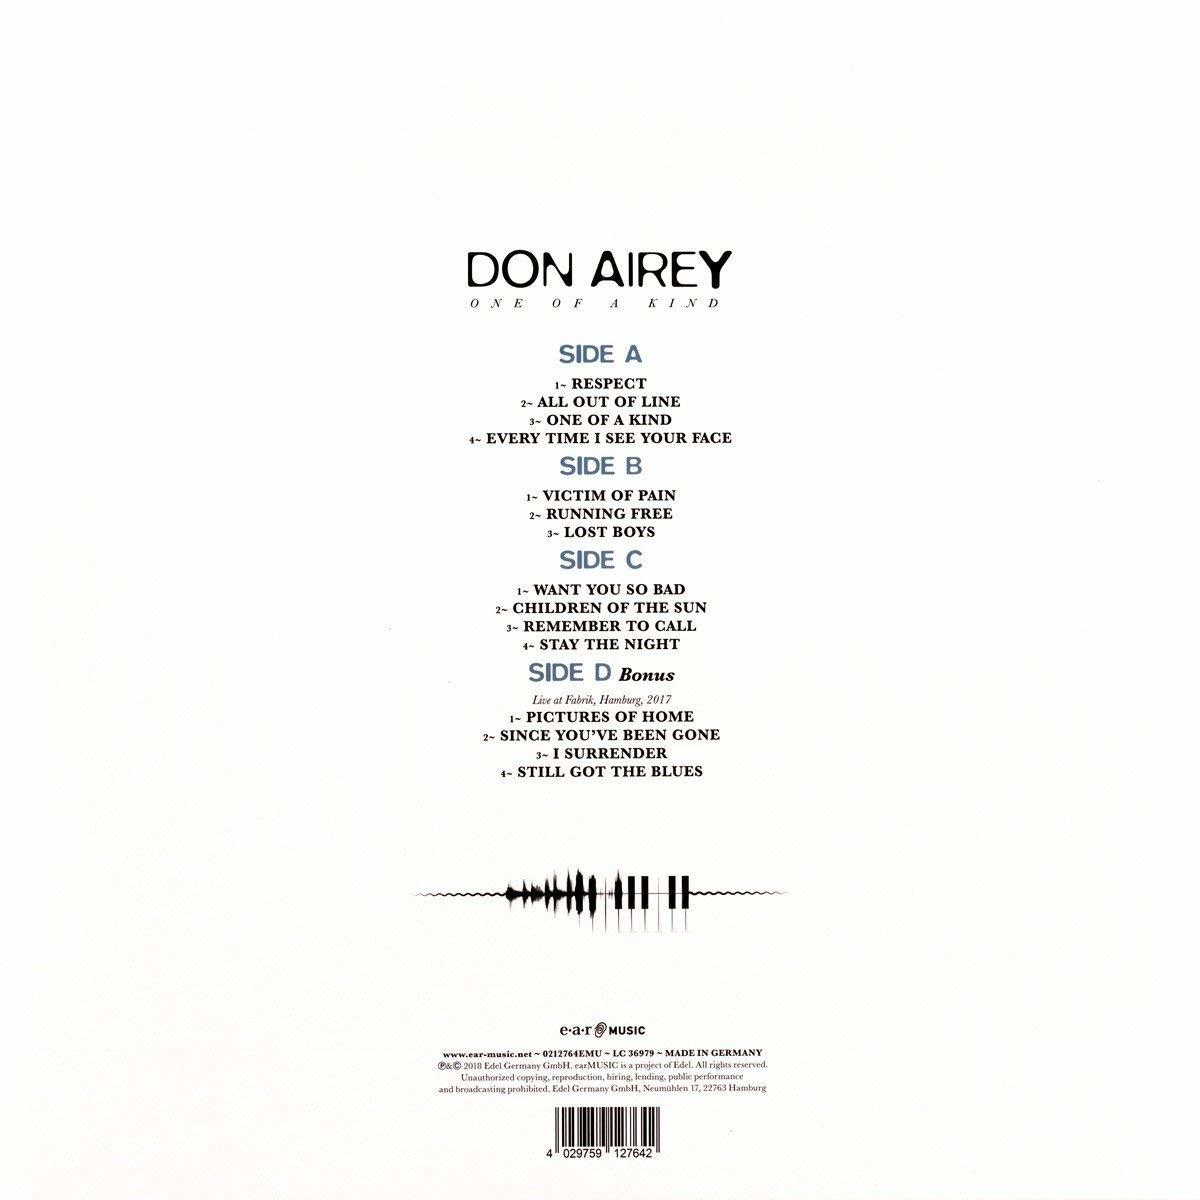 - A Airey - Don Kind Of (Vinyl) One